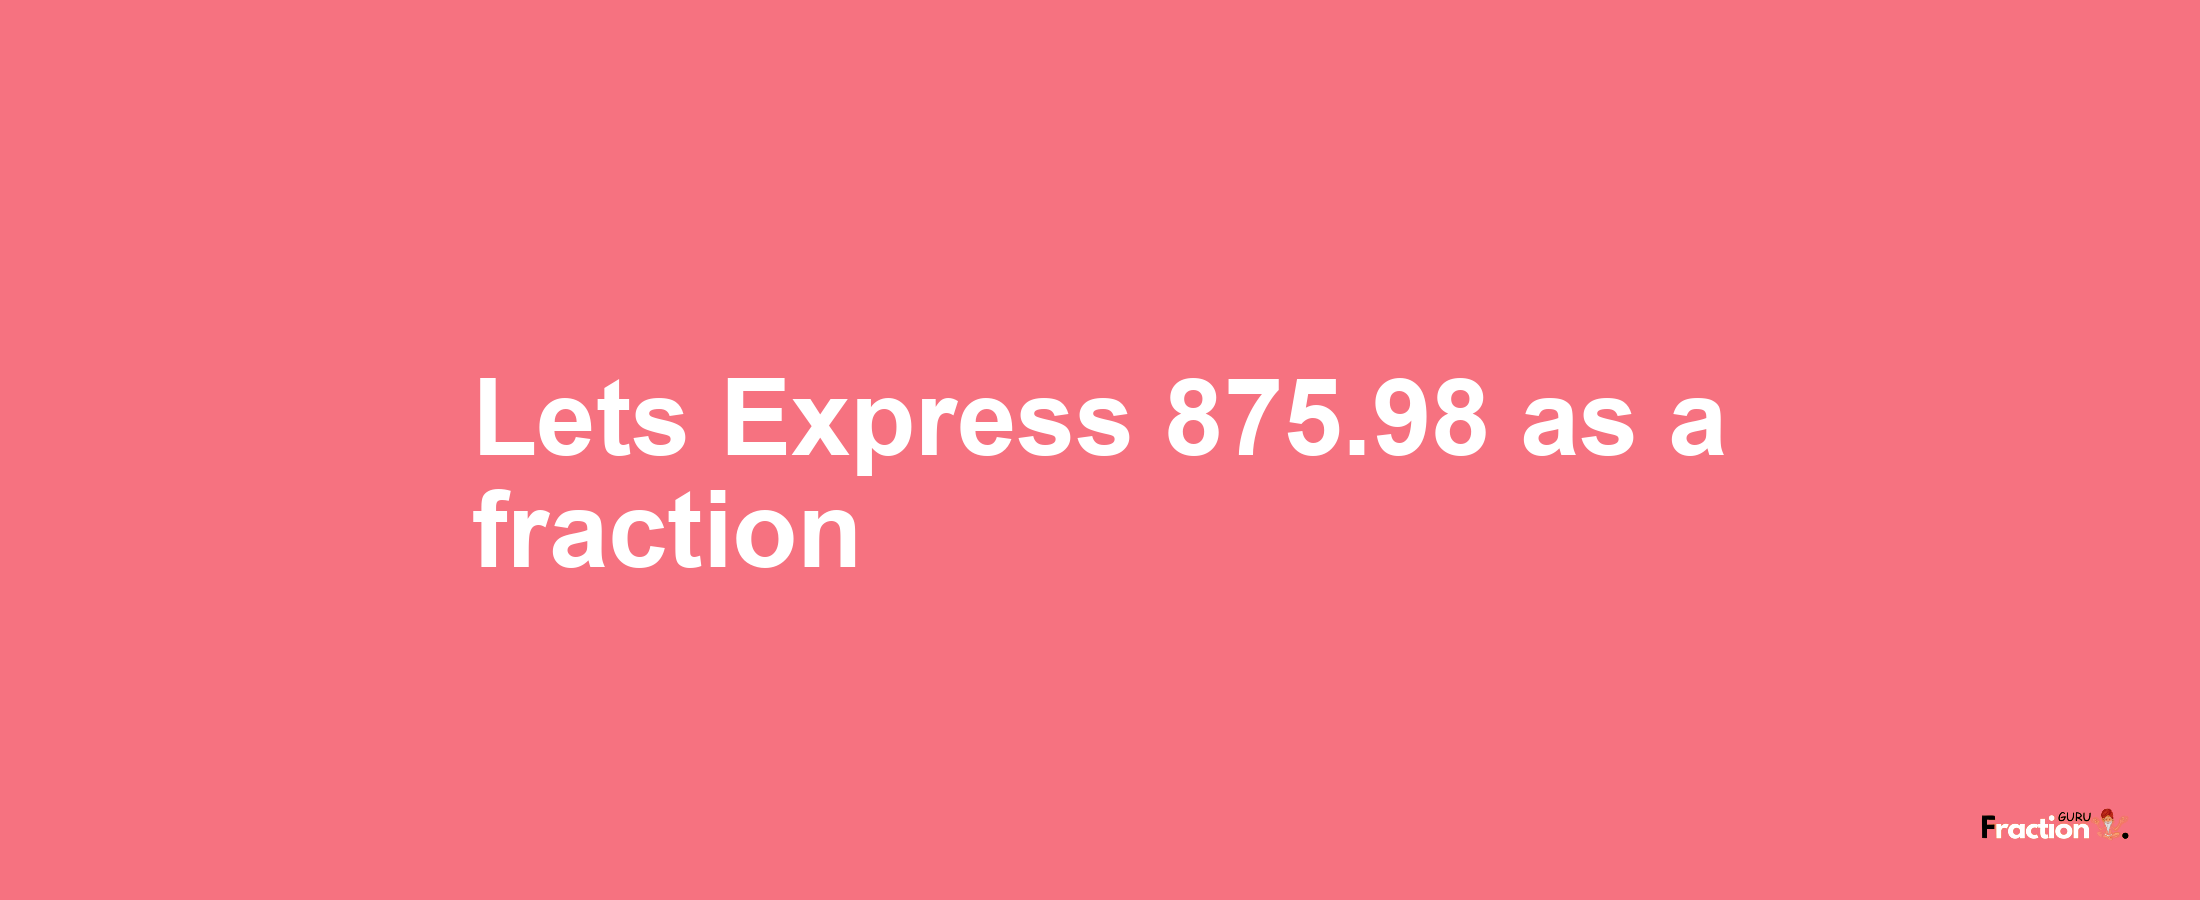 Lets Express 875.98 as afraction